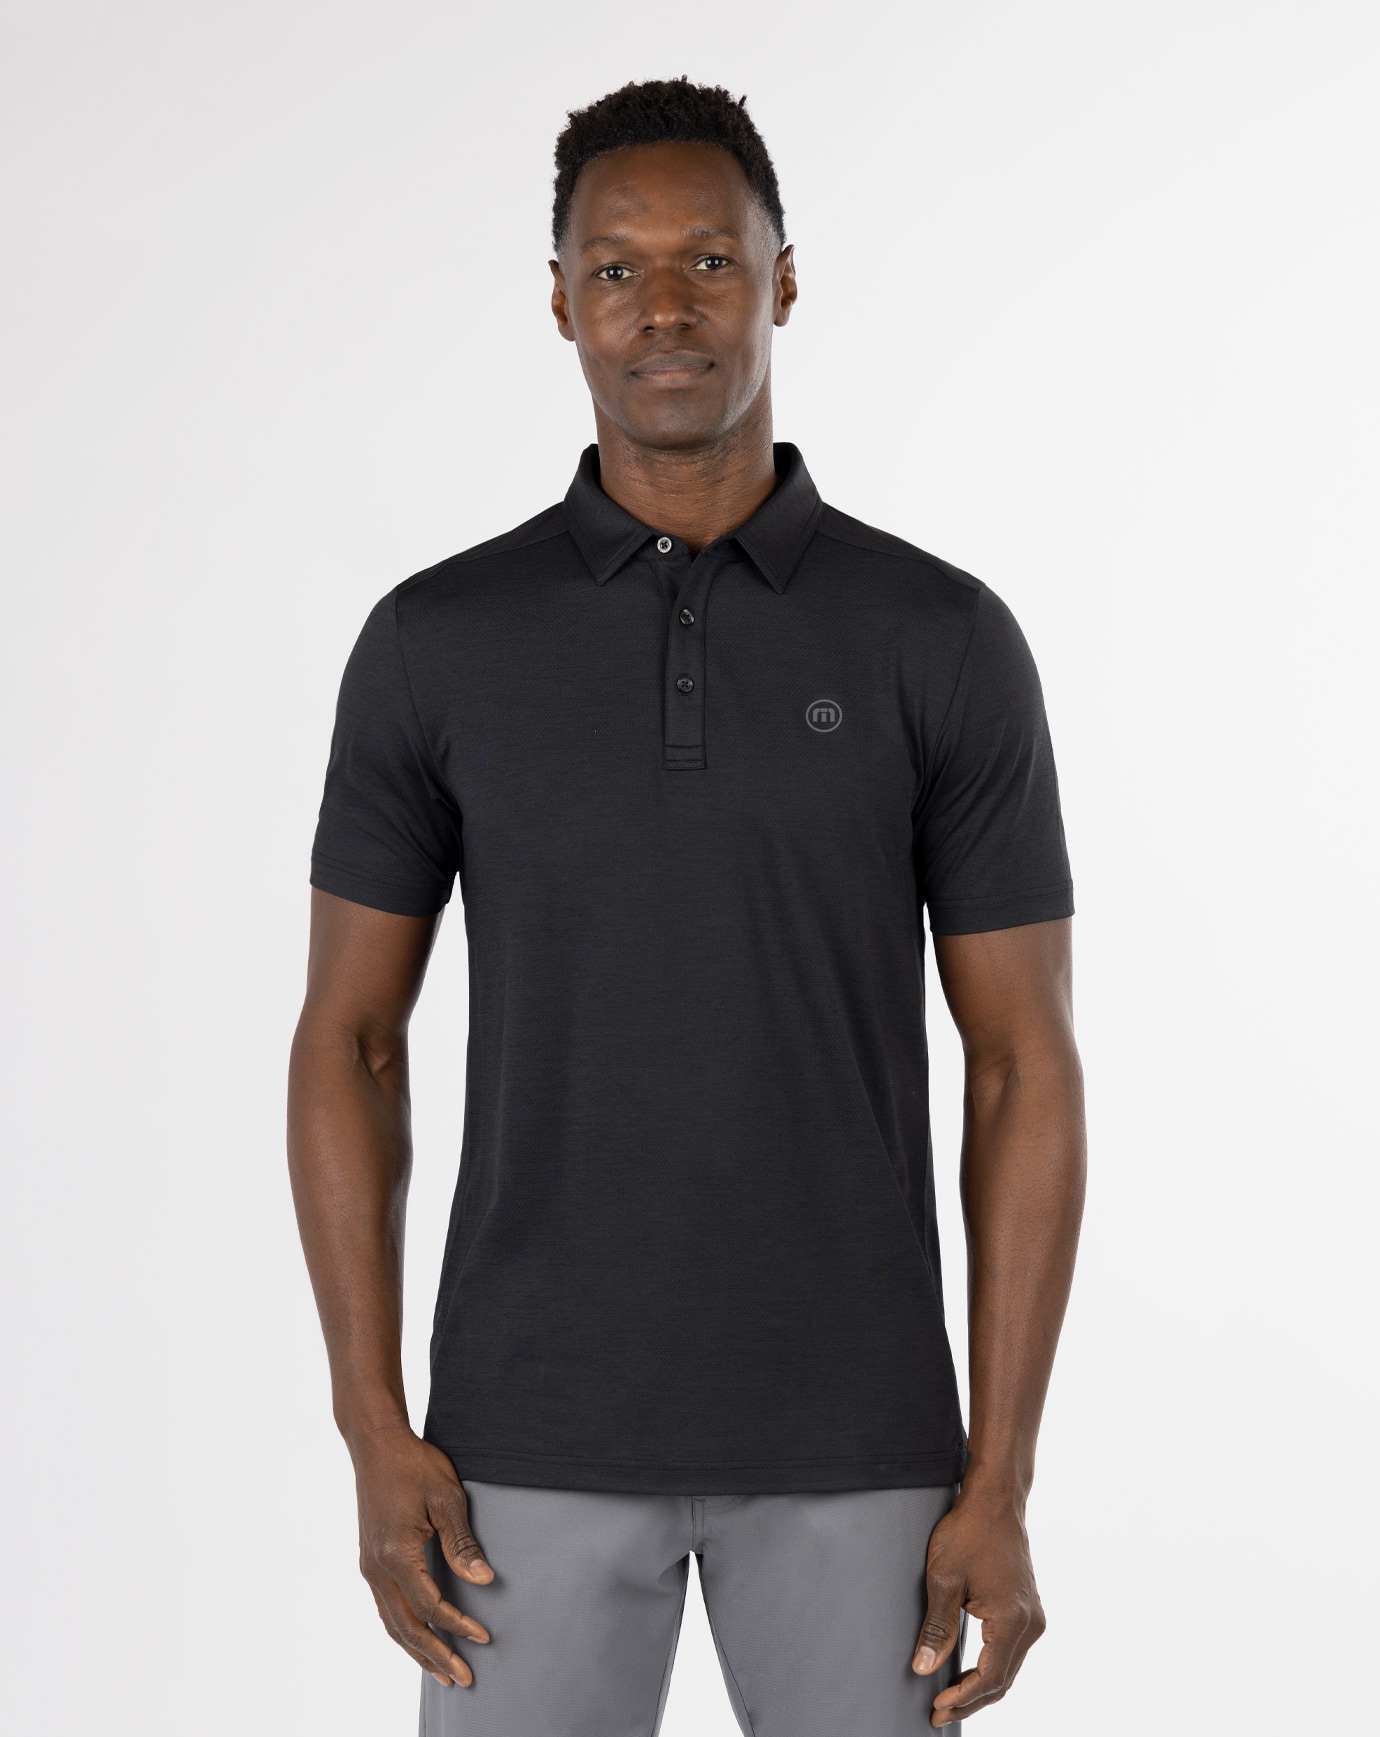 Related Product - HEATING UP GOLF POLO